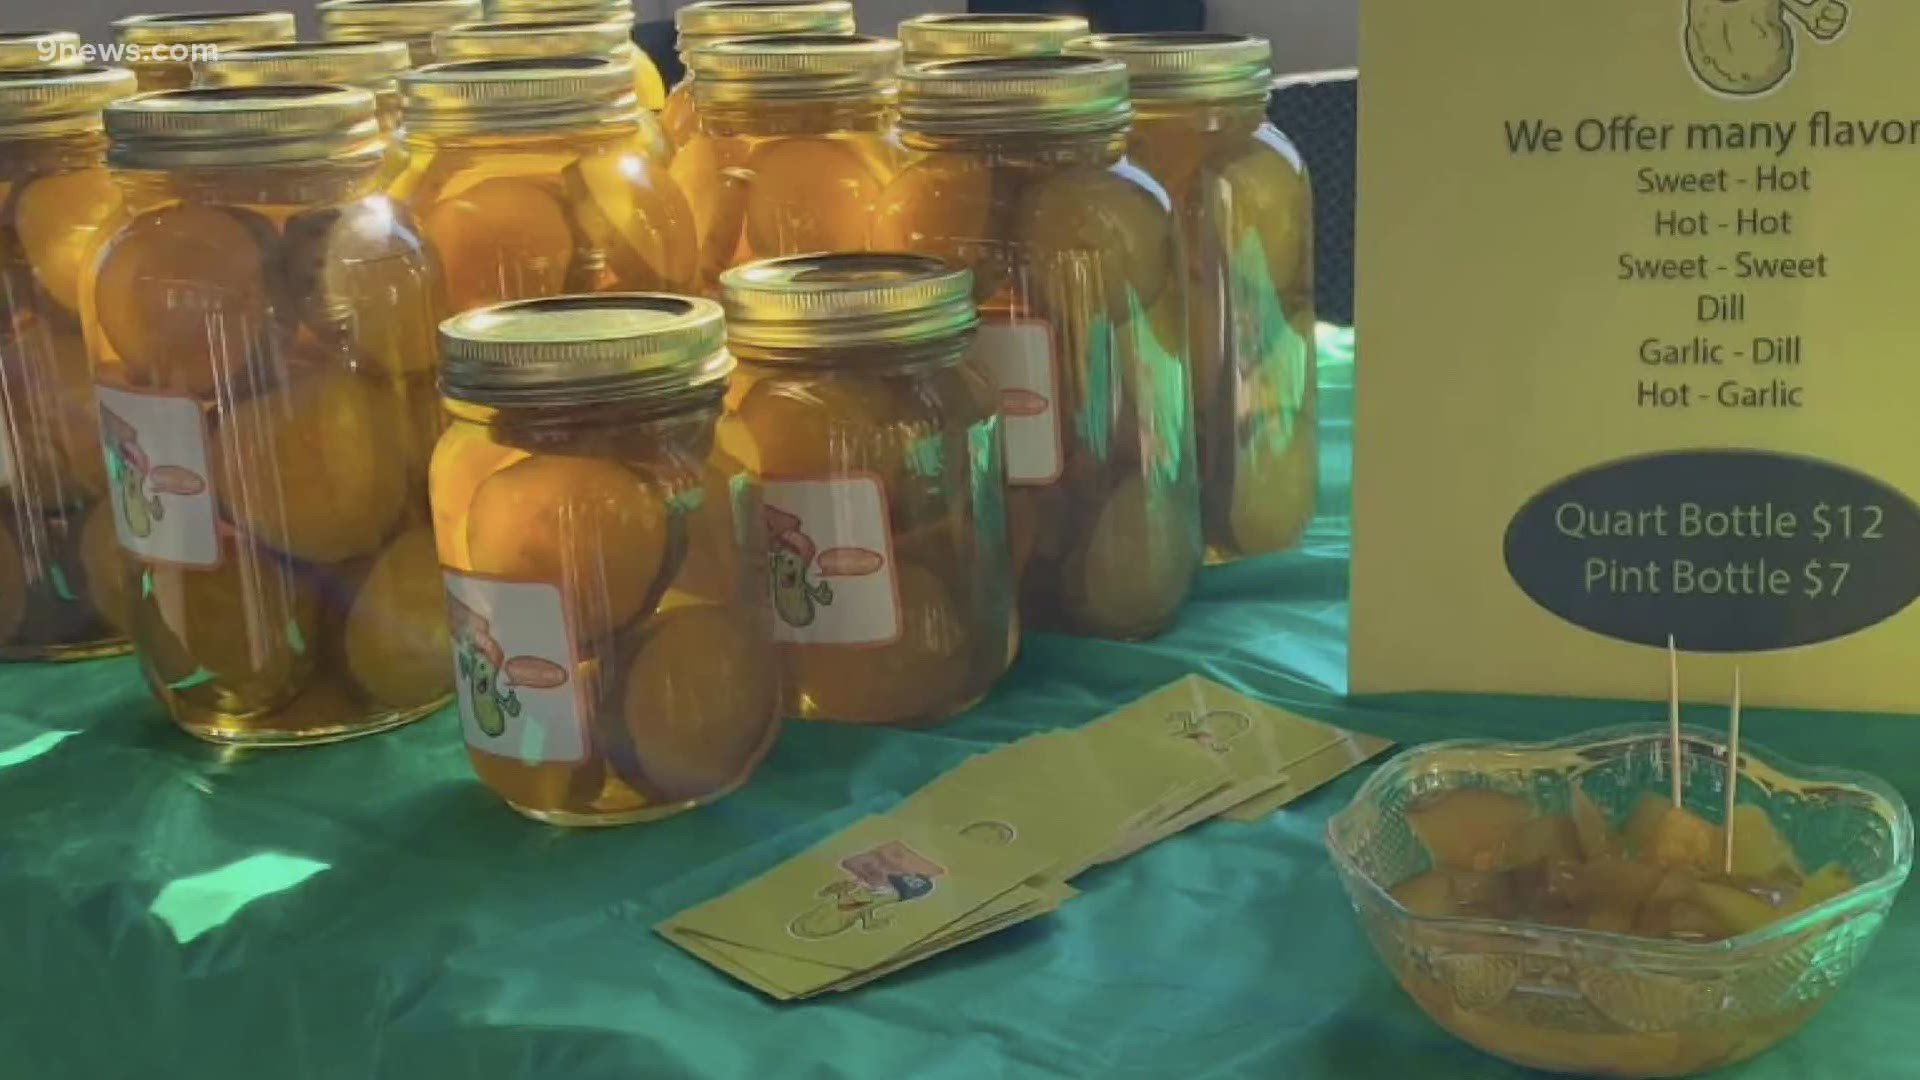 The People’s Pickles are the flagship business of Lower The Barrier, a nonprofit started to help create economic opportunities for marginalized people.